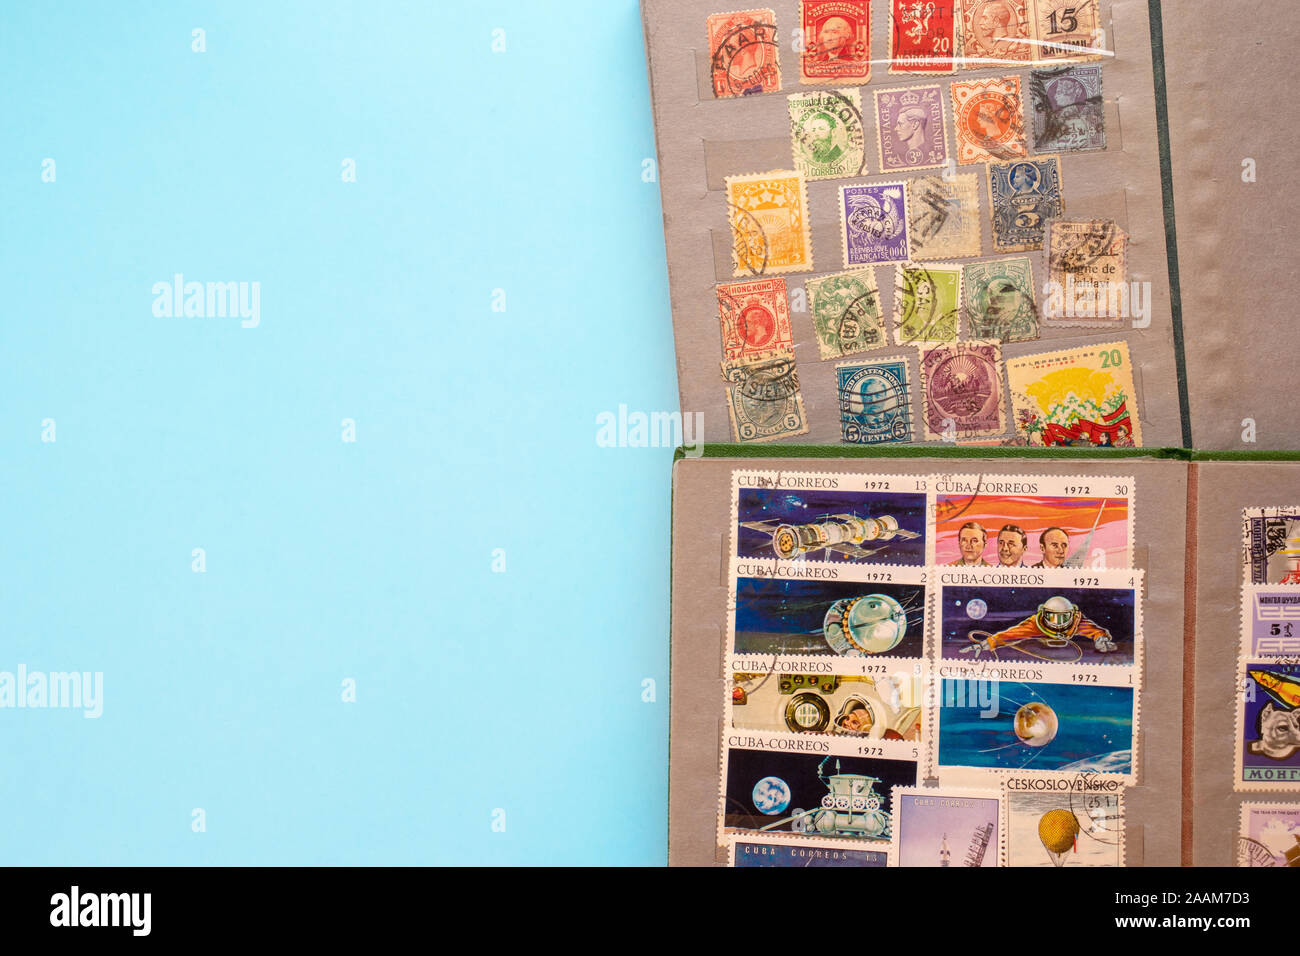 Stamp collecting. Two albums with old expensive valuable post stamps on blue background. Stock Photo